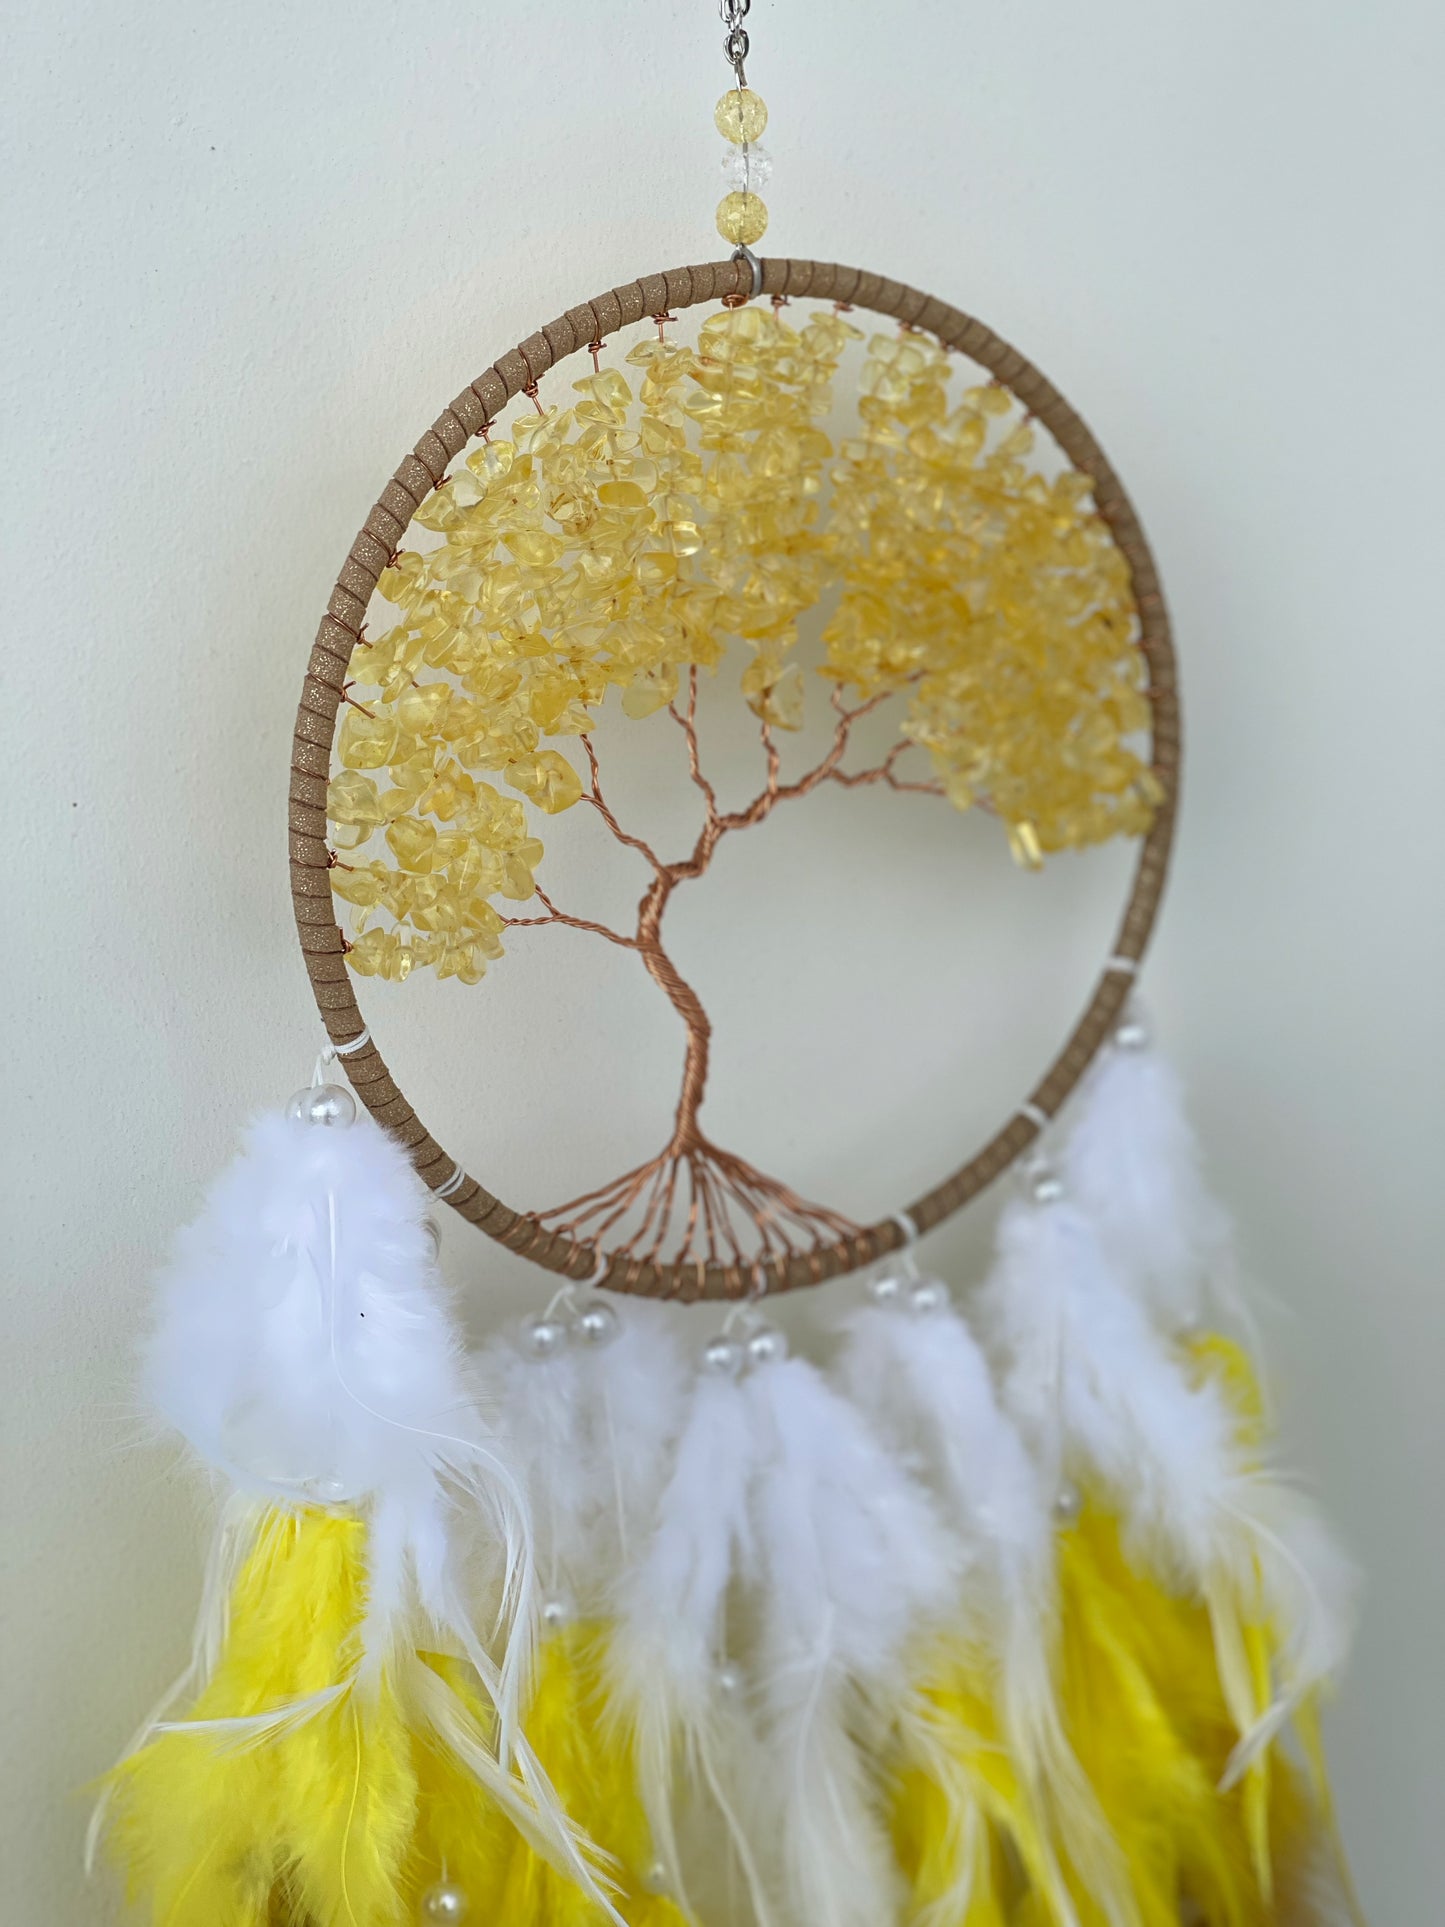 Citrine chips yellow and white dreamcatcher